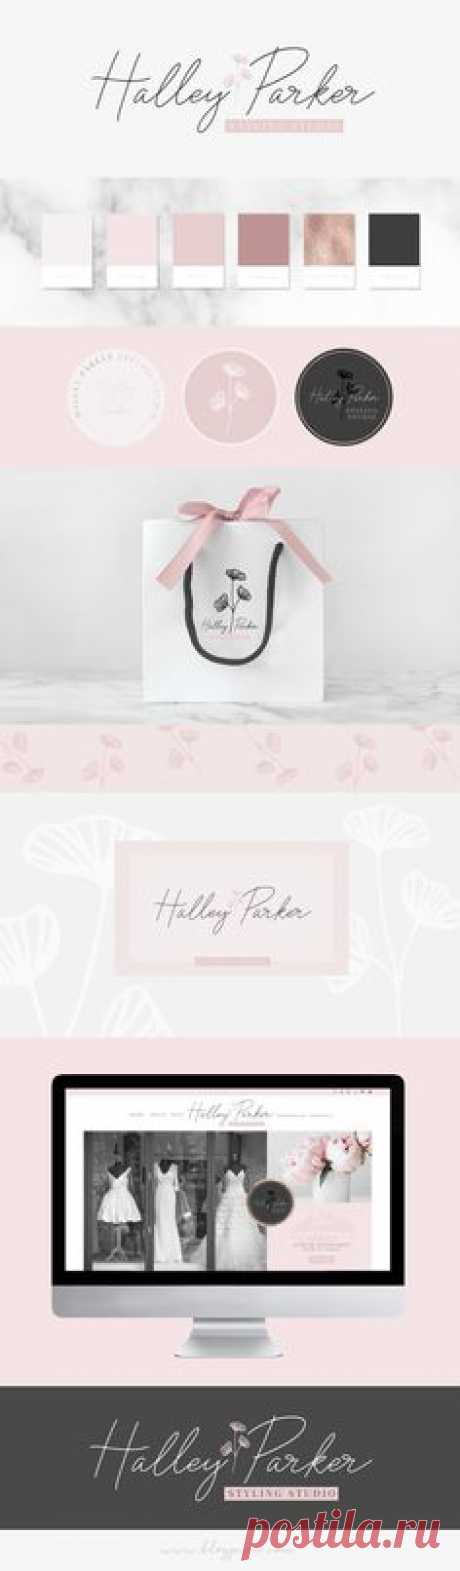 Floral brand design identity and inspiration by Blog Pixie. Packaging, site layout and logo ideas, fonts, hand-drawn illustrations and a pretty color palette. Find the Floriana Creator Studio on Creative Market.